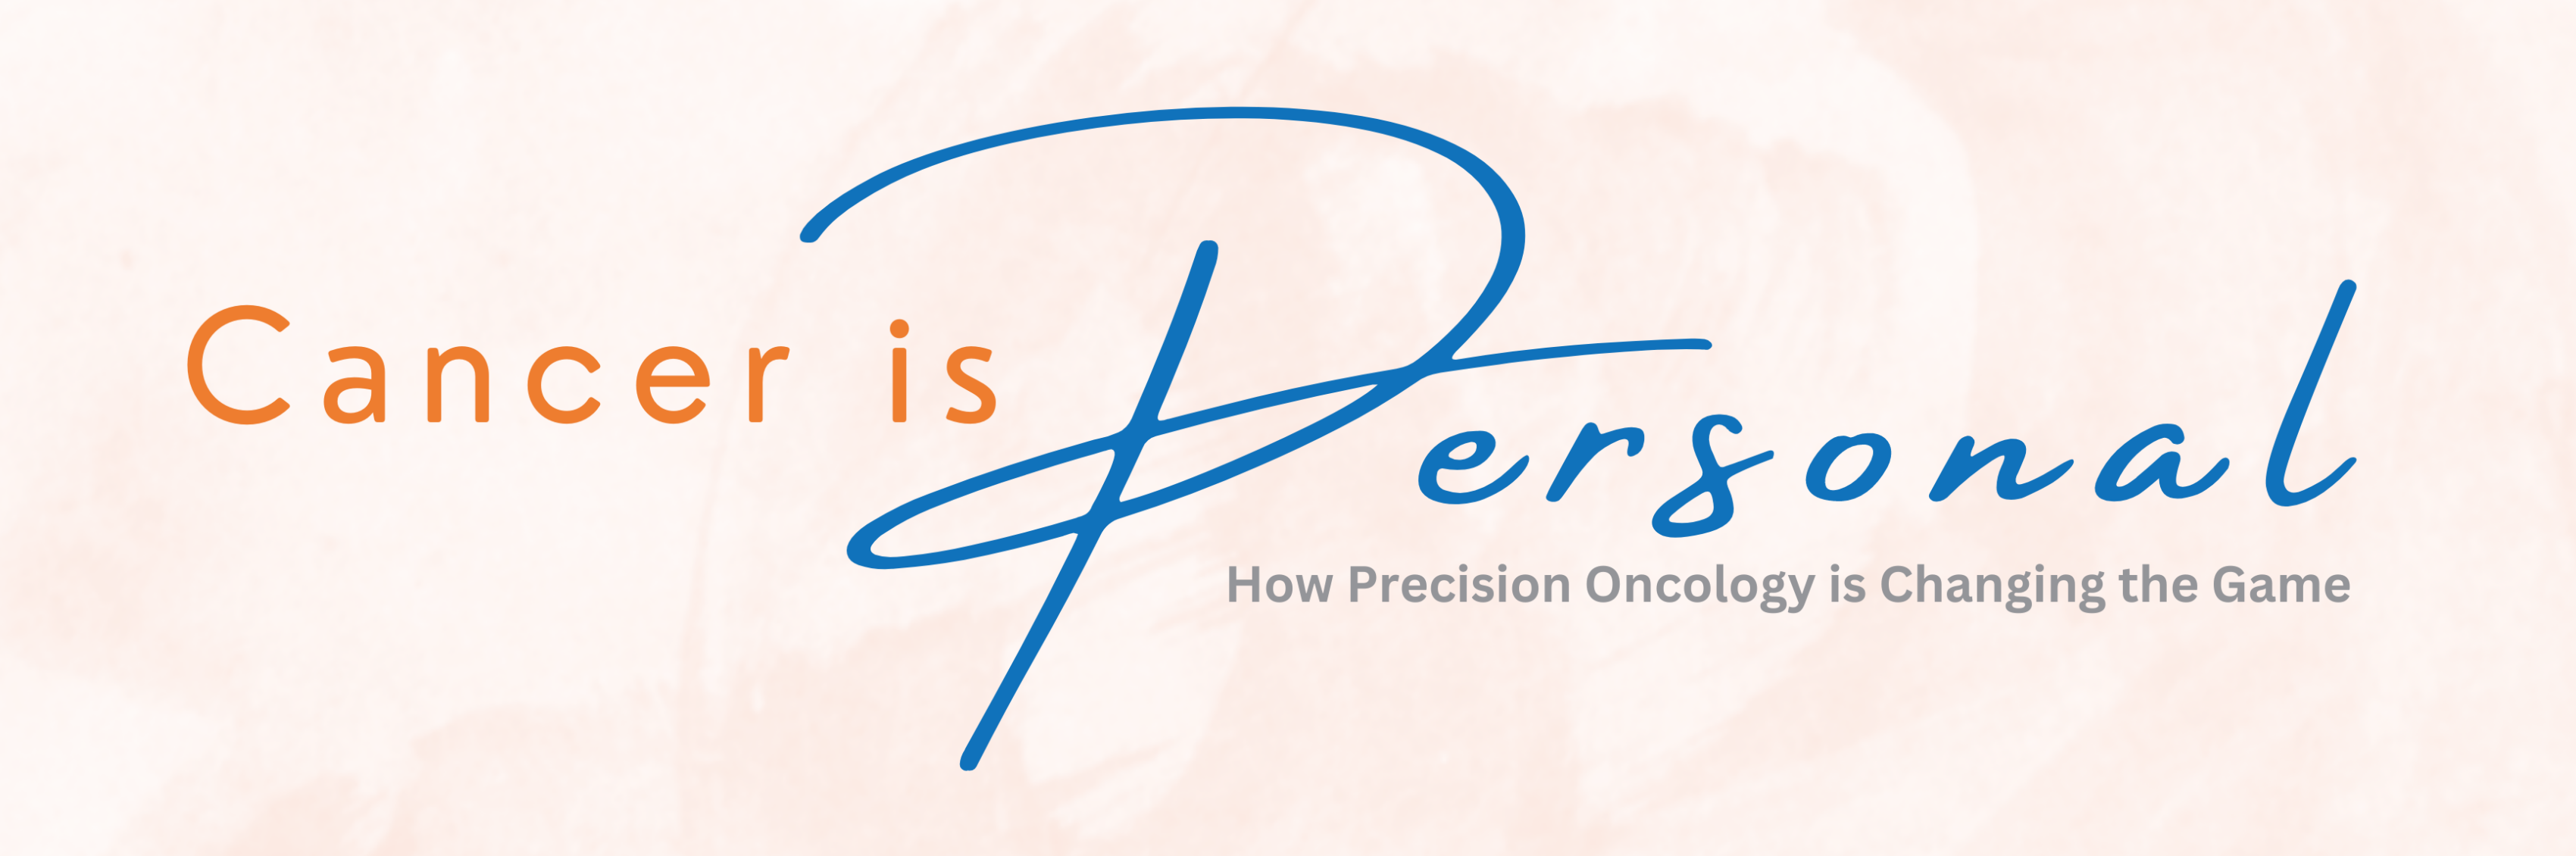 Cancer is Personal - How Precision Oncology is Changing the Game